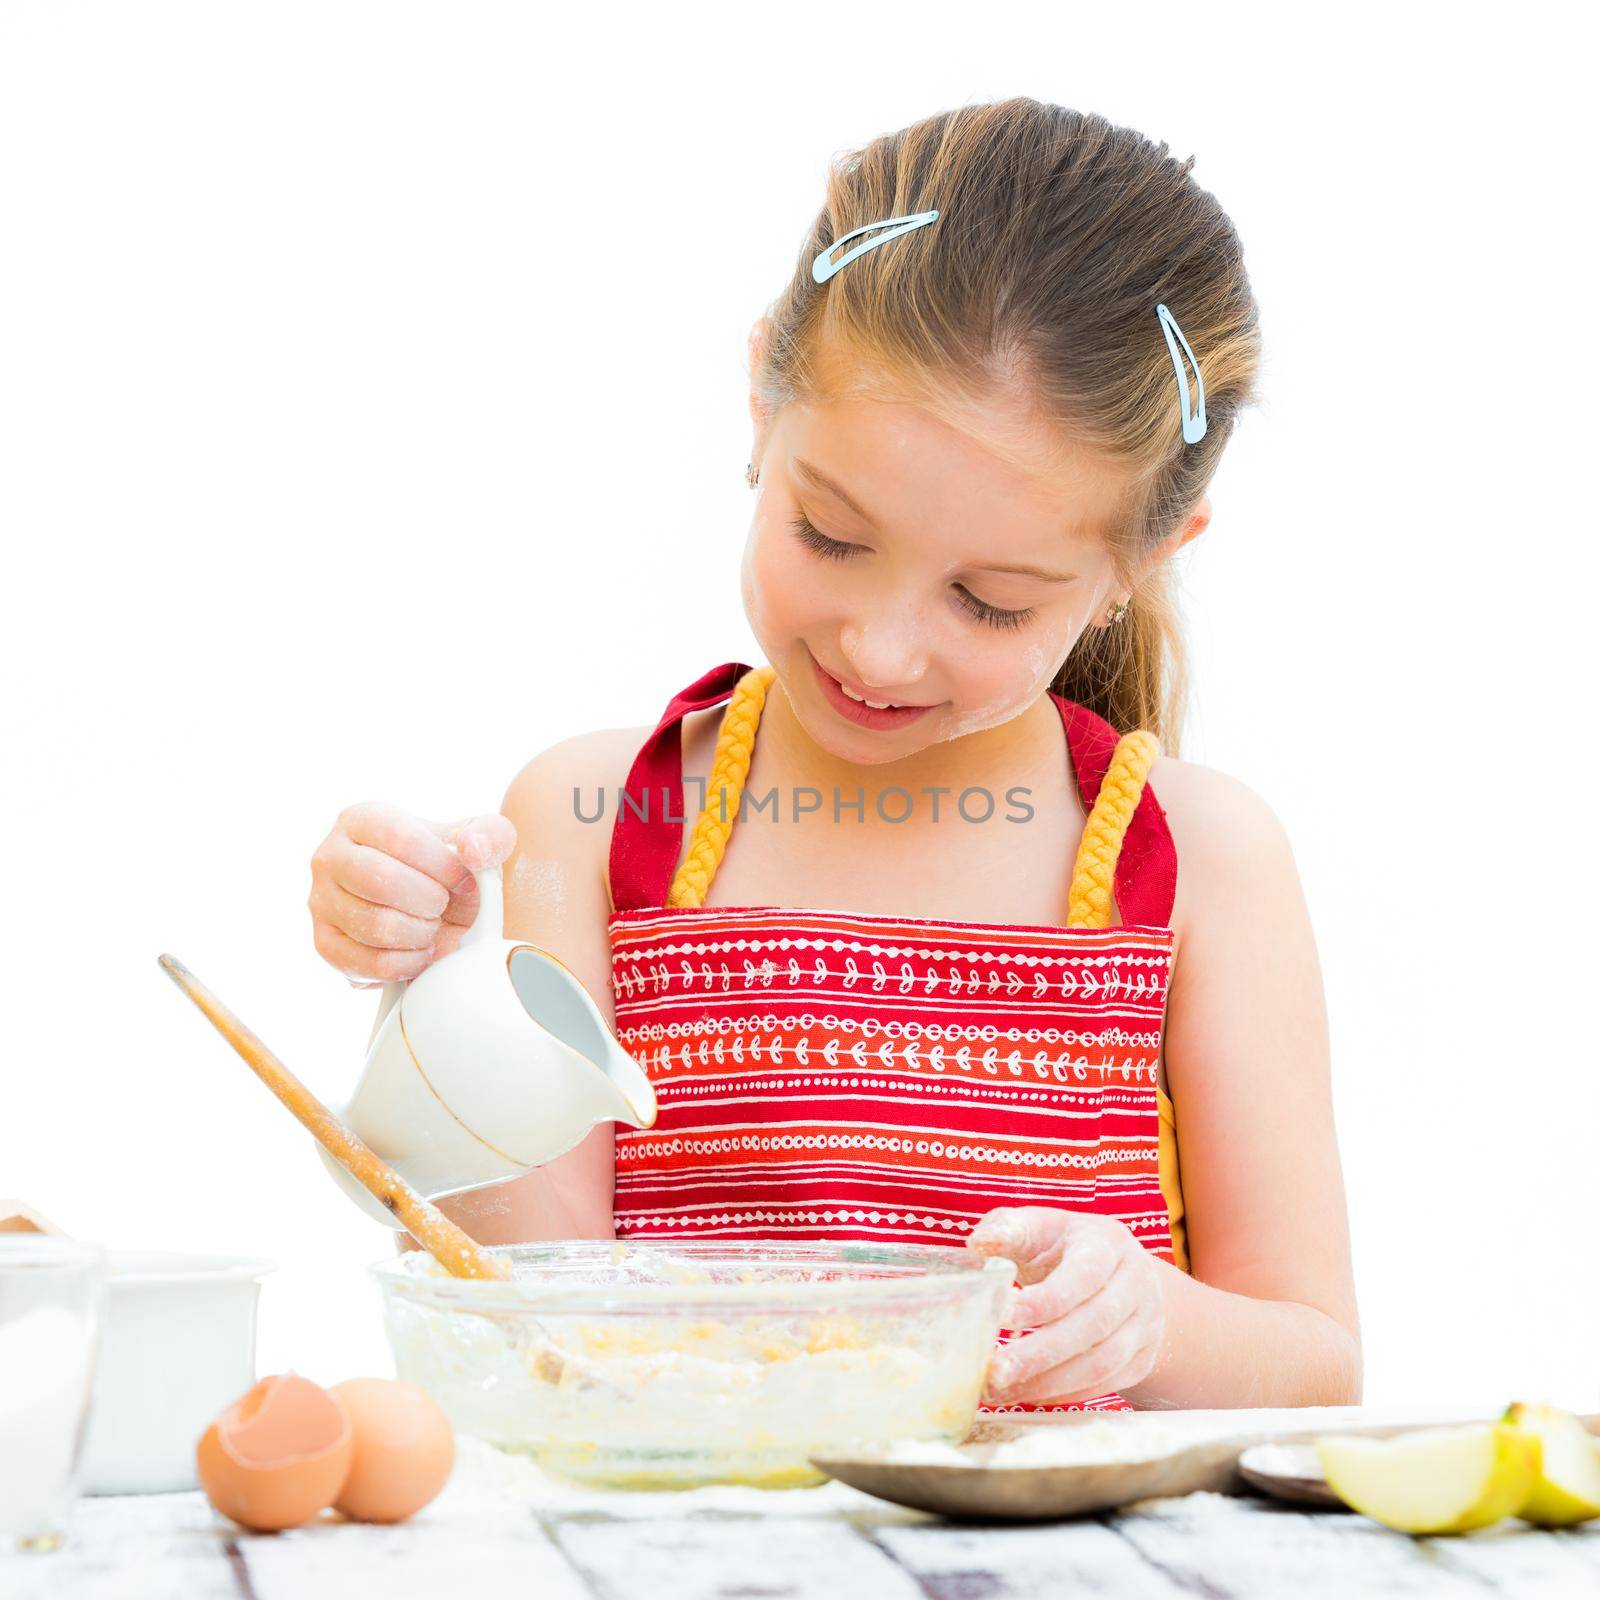 cutre little girl making dough isolated on a white background